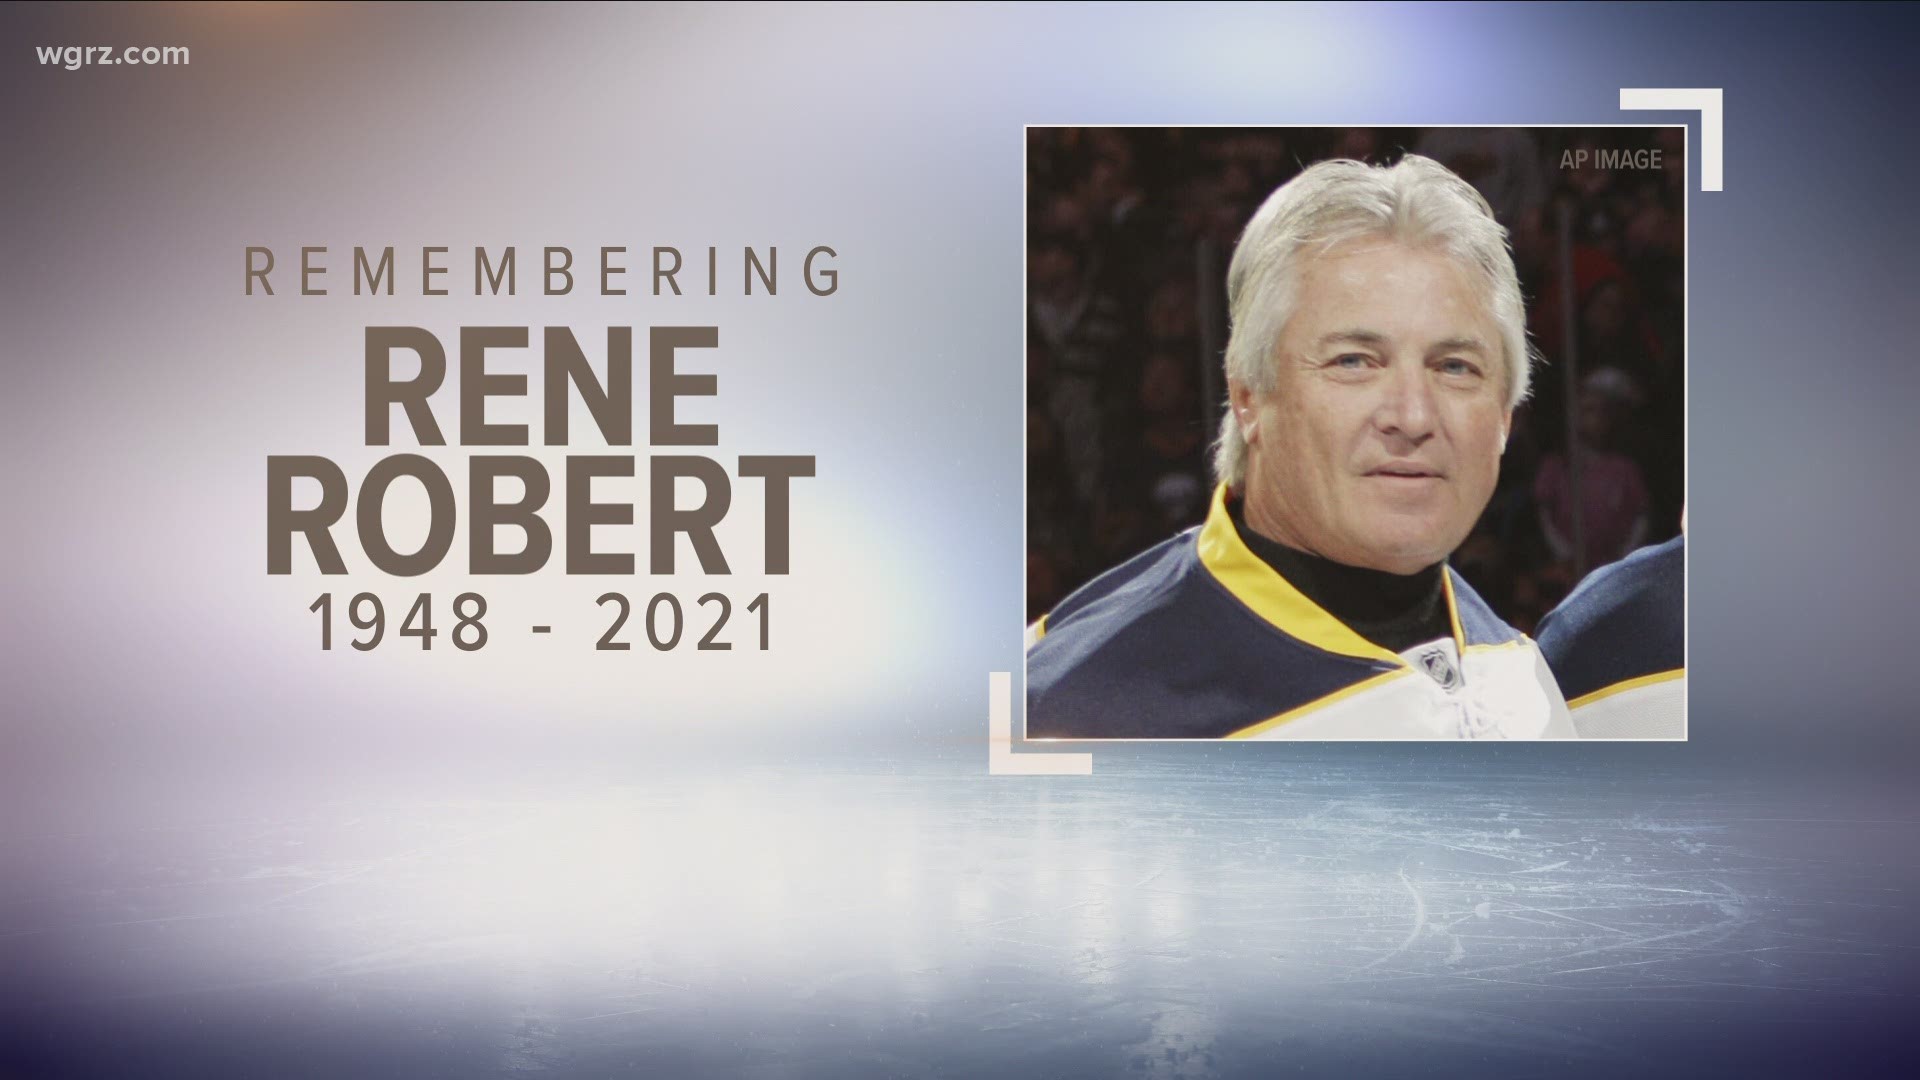 Gilbert Perreault on the death of Rene Robert: 'This is a big, big